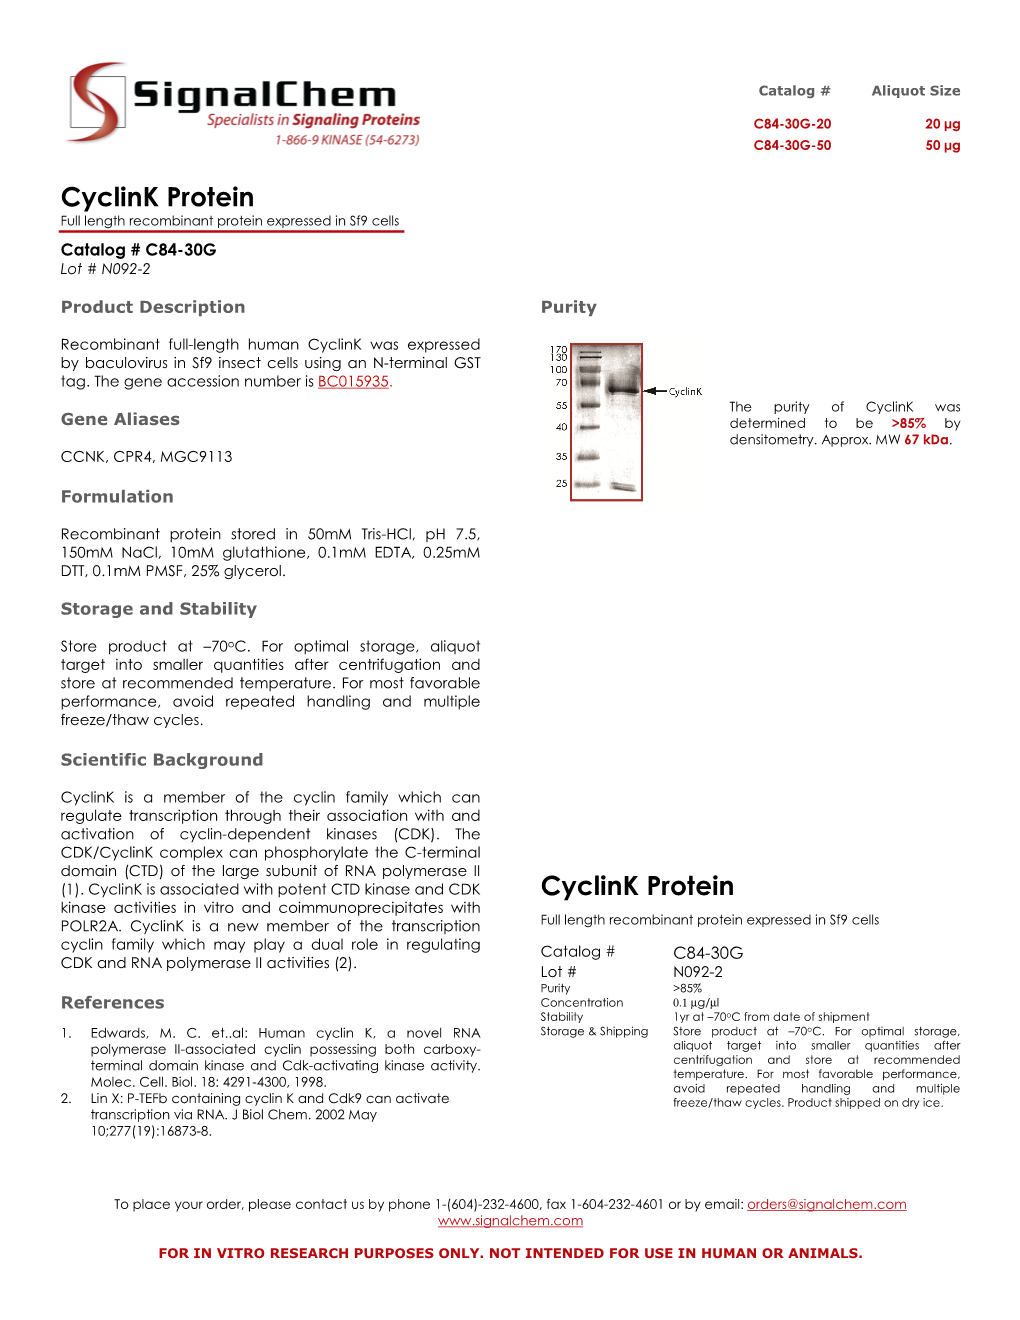 Cyclink Protein Cyclink Protein